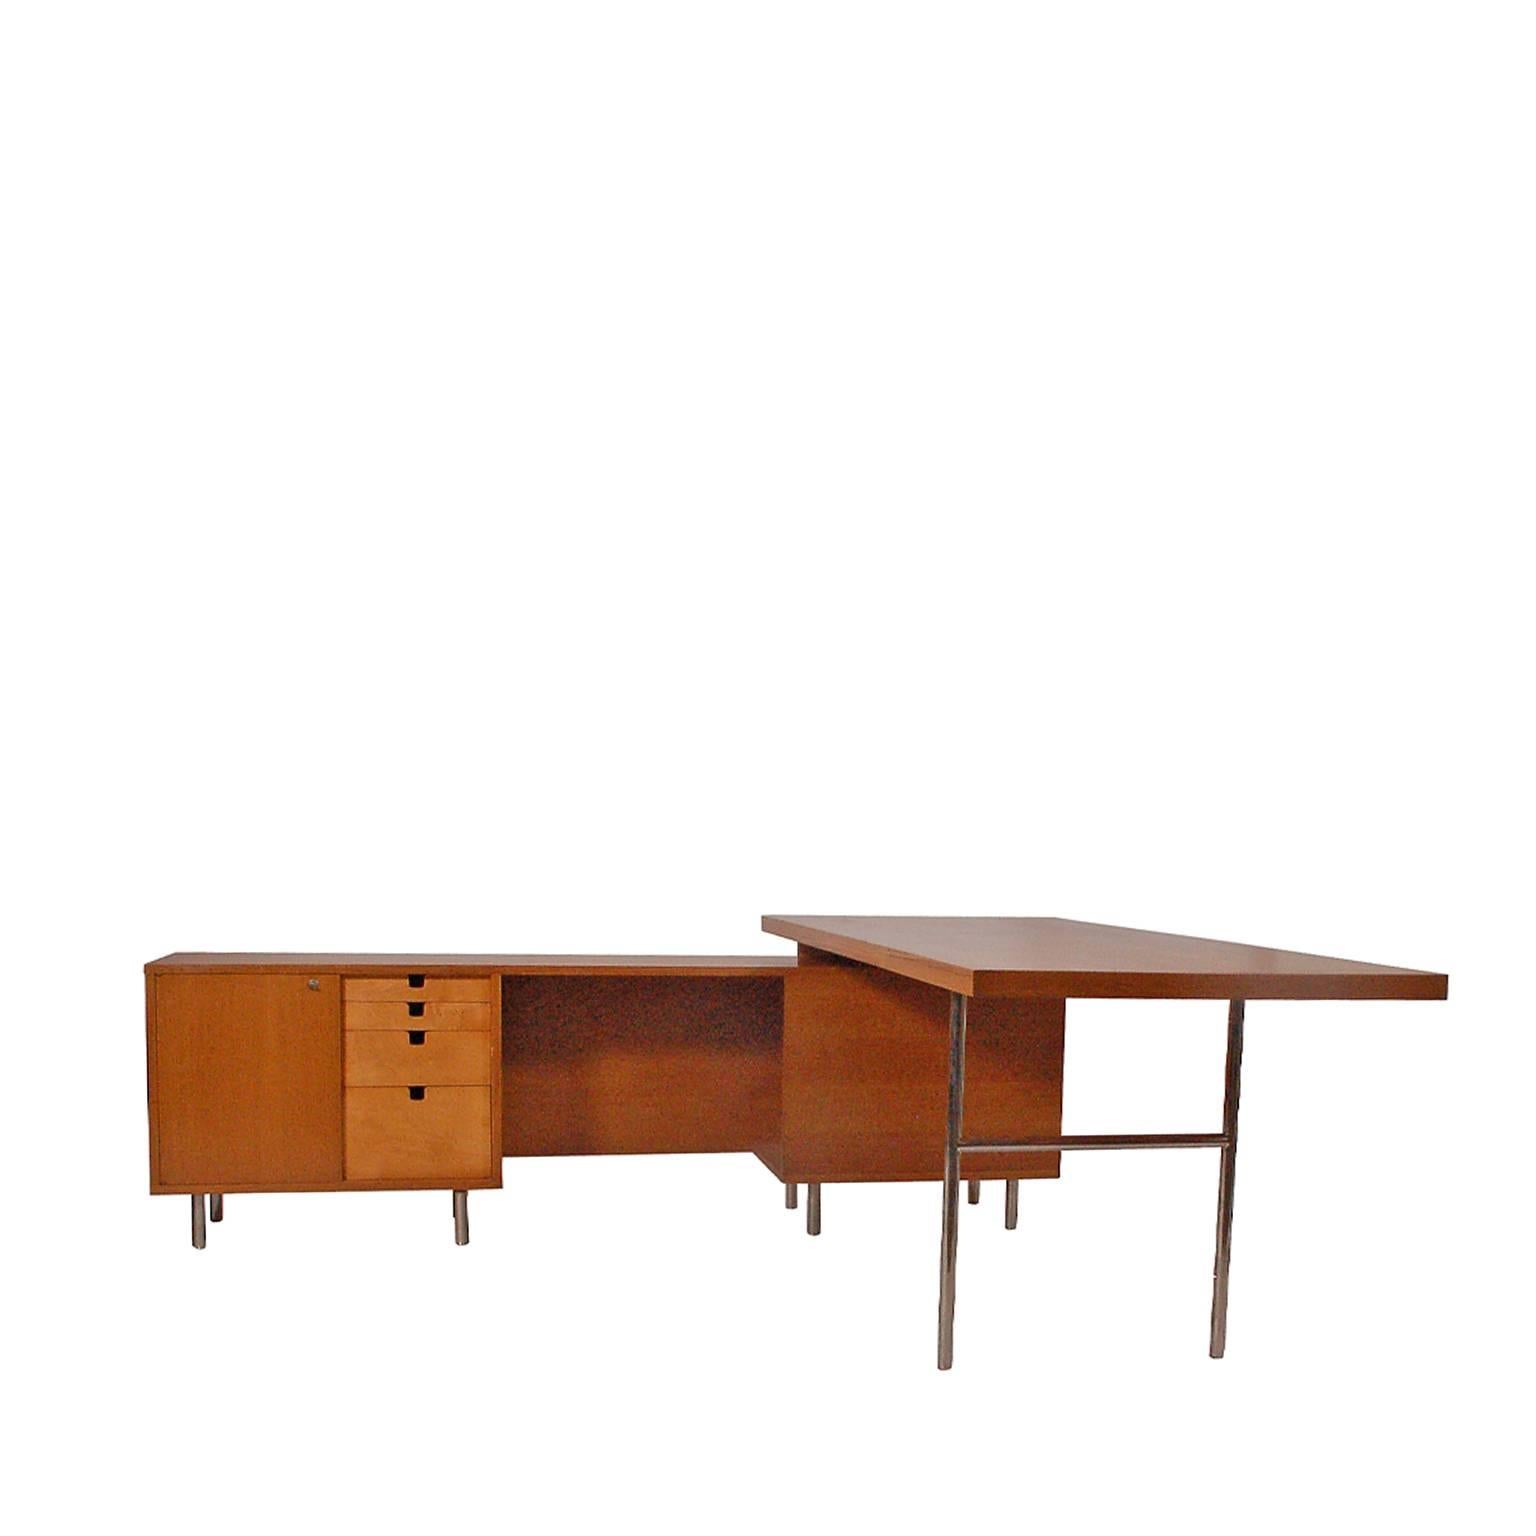 Original production L-shaped executive desk with oak and maple and chrome steel legs and writing support. Original silver label in drawer. 

Work surface measure: 74 in. W x 36 in. D x 28.5 in H. Credenza measurements below.